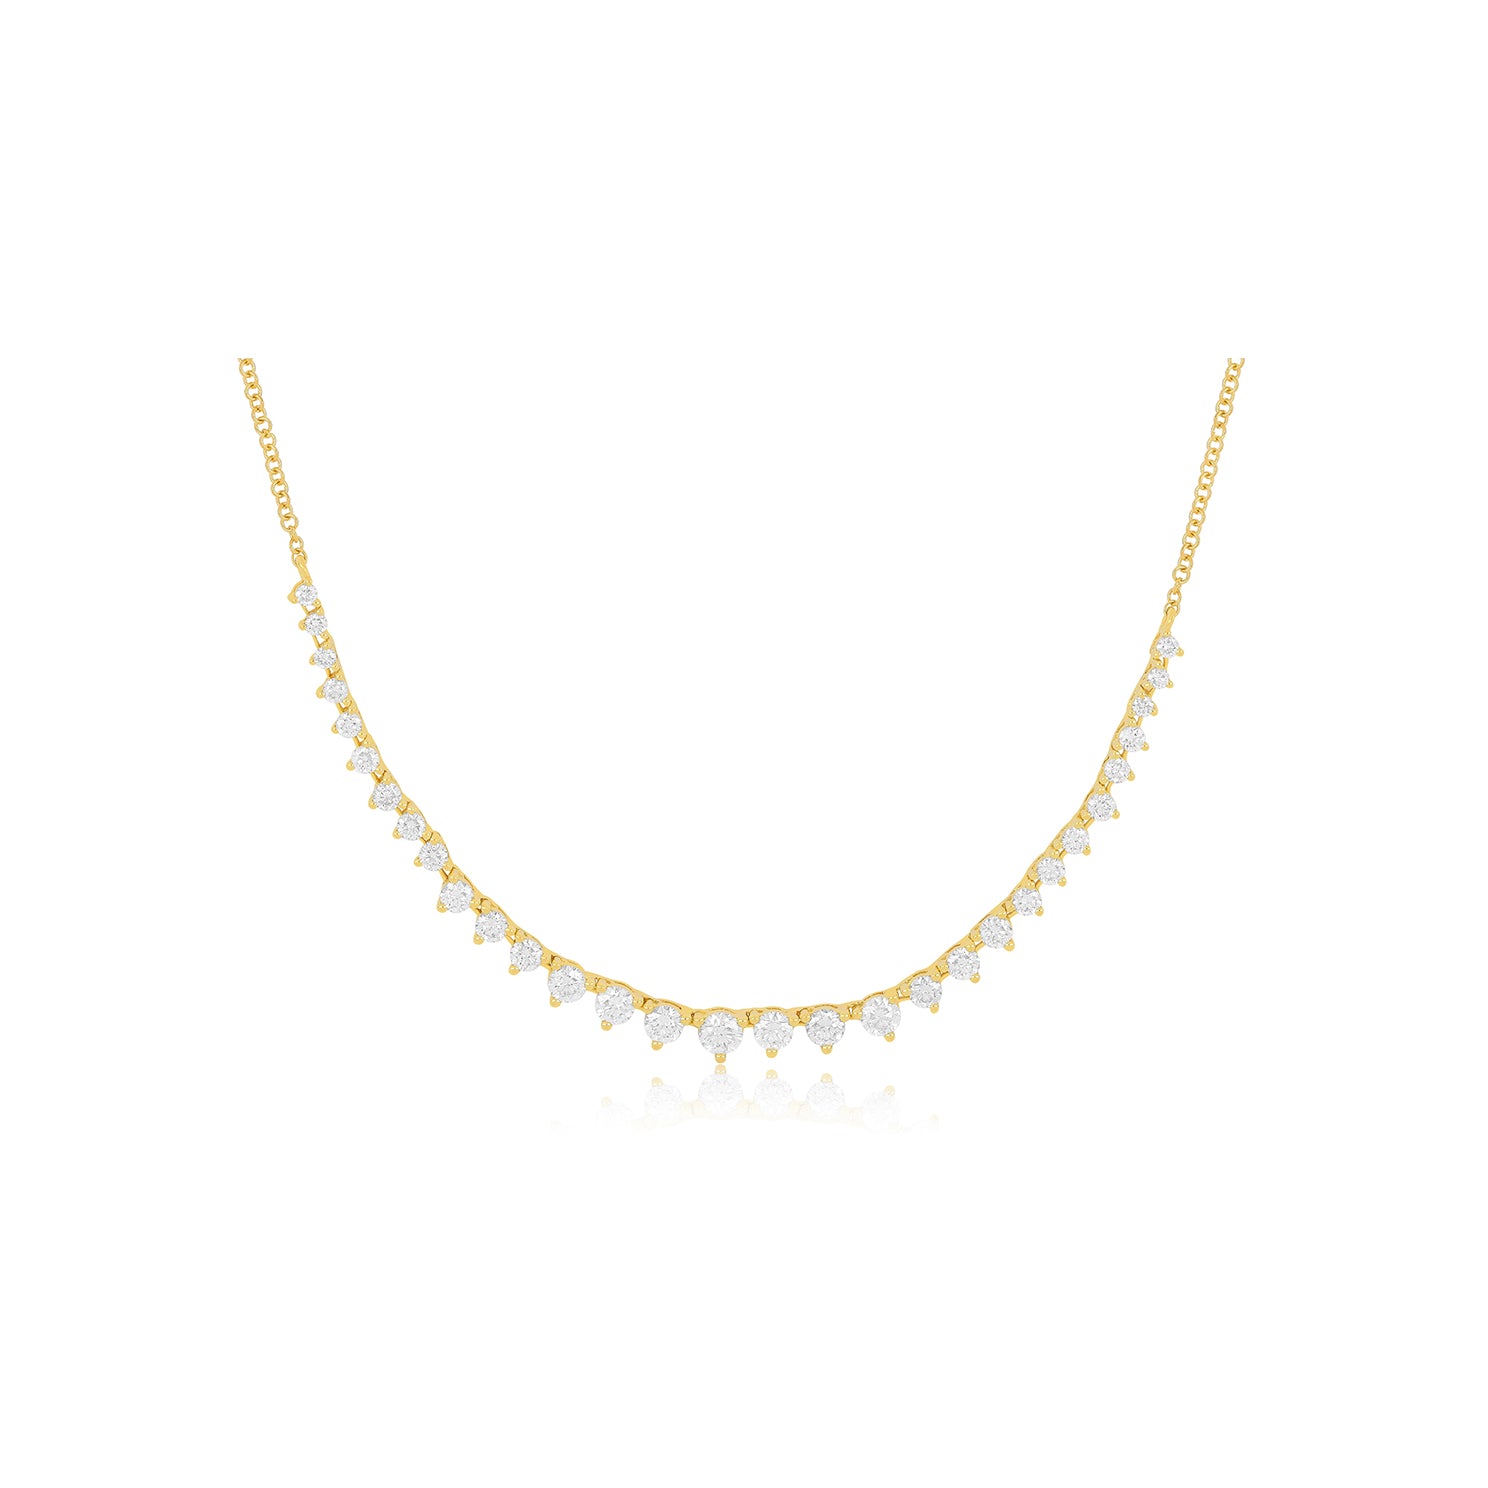 Graduated Diamond Necklace in 14k yellow gold